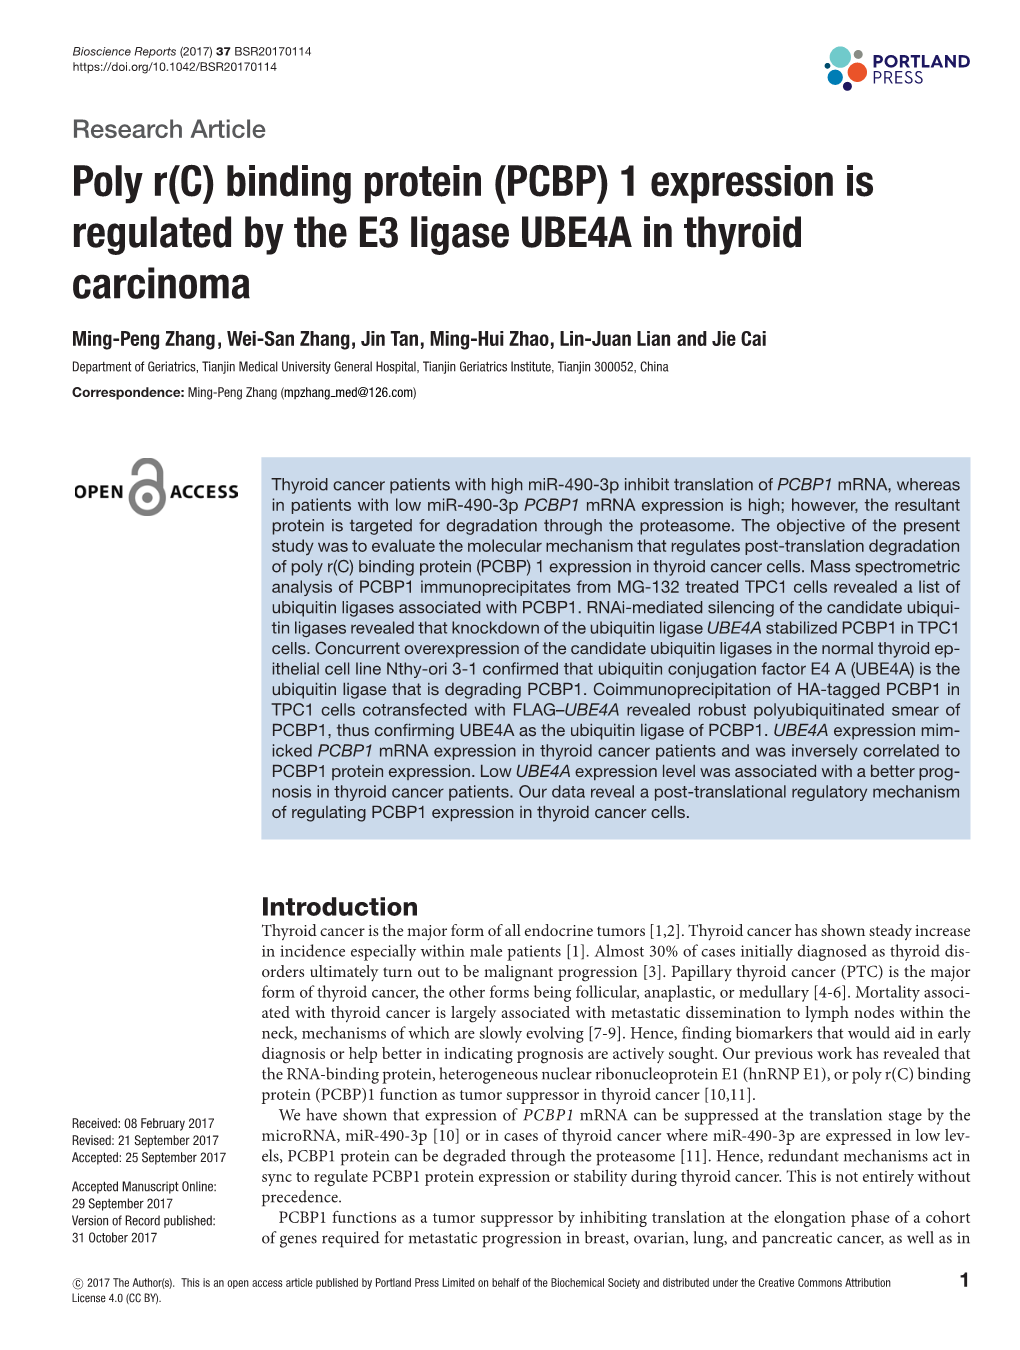 Binding Protein (PCBP) 1 Expression Is Regulated by the E3 Ligase UBE4A in Thyroid Carcinoma